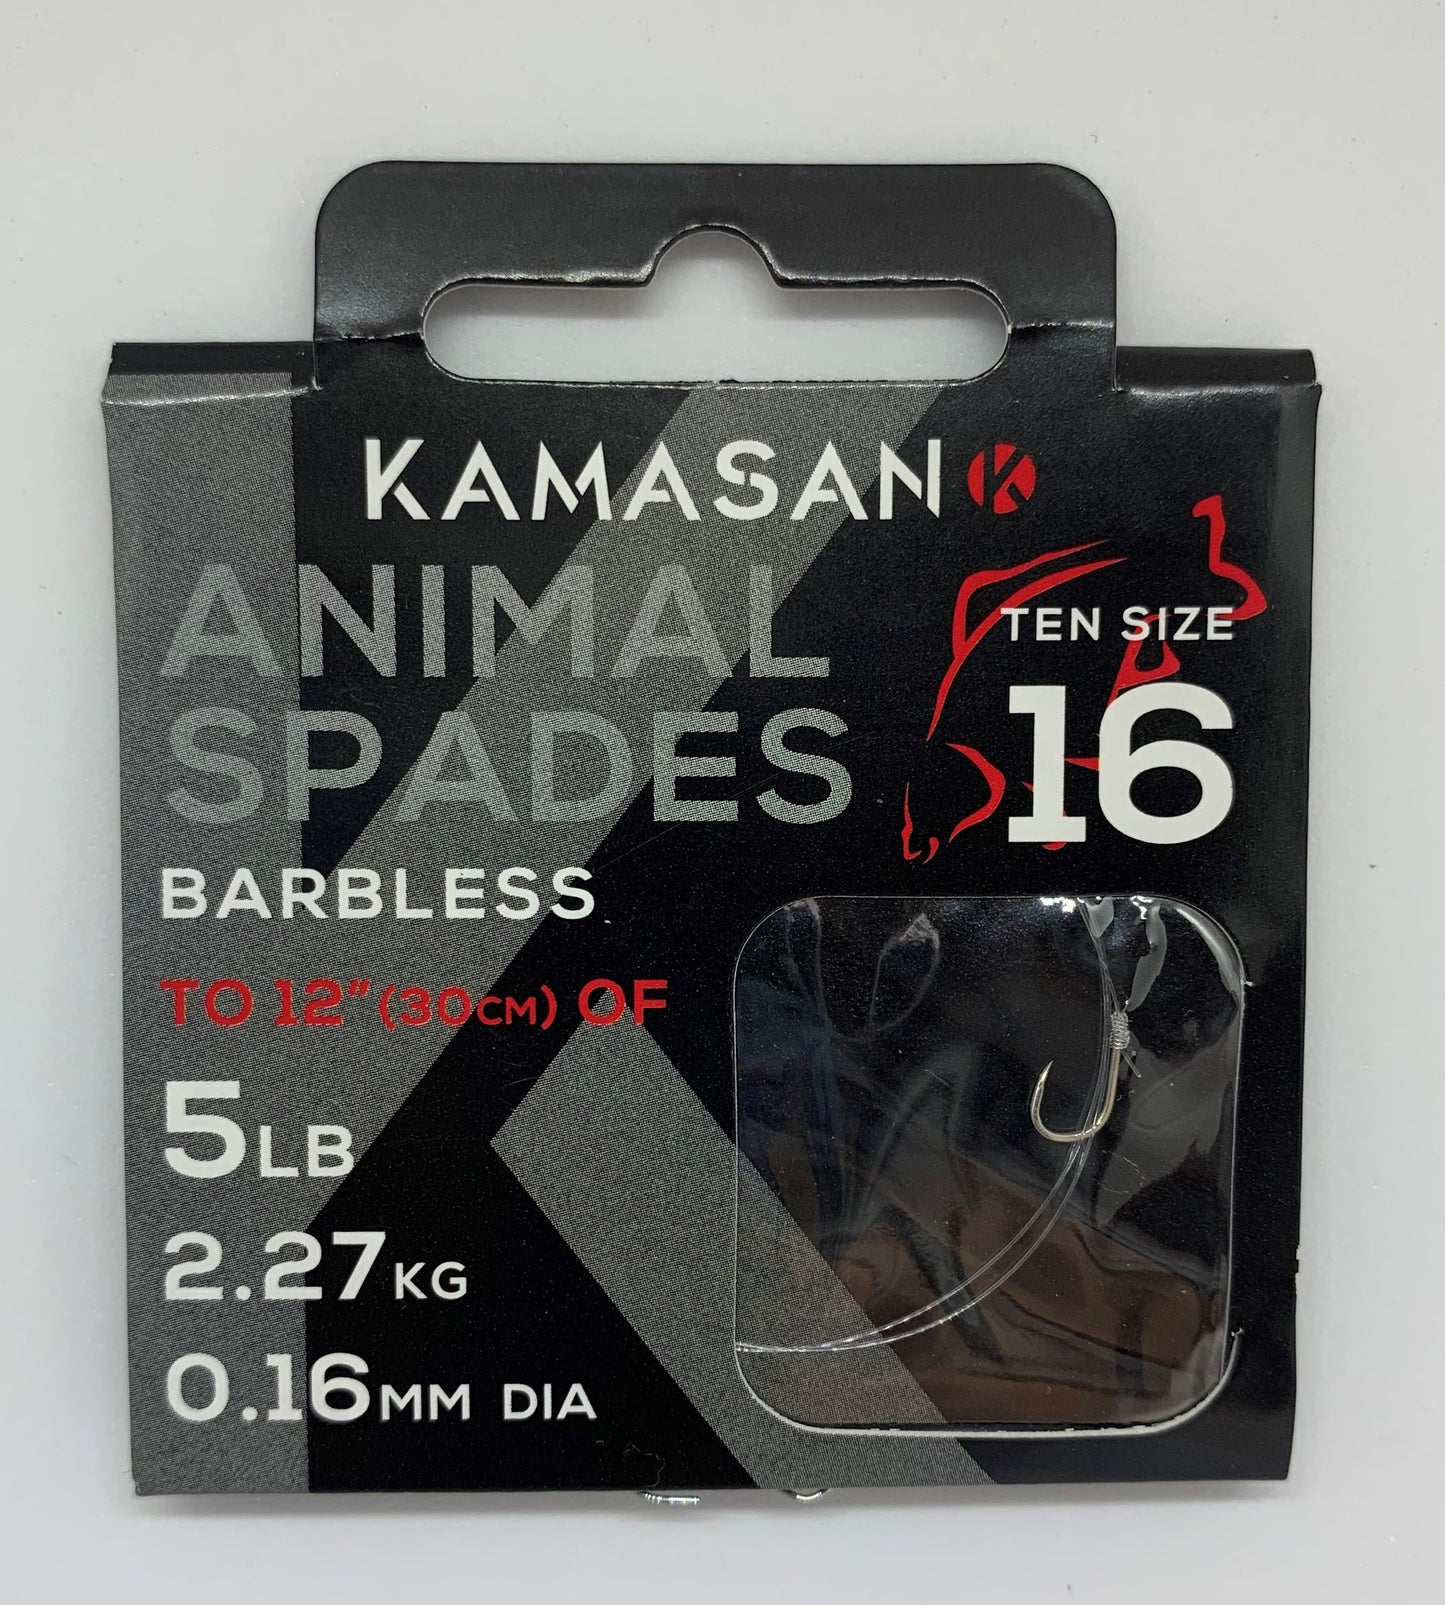 Kamasan Animal X-Strong Size 16 Hooks to Nylon. Ideal For Float Or Feeder Fishing.